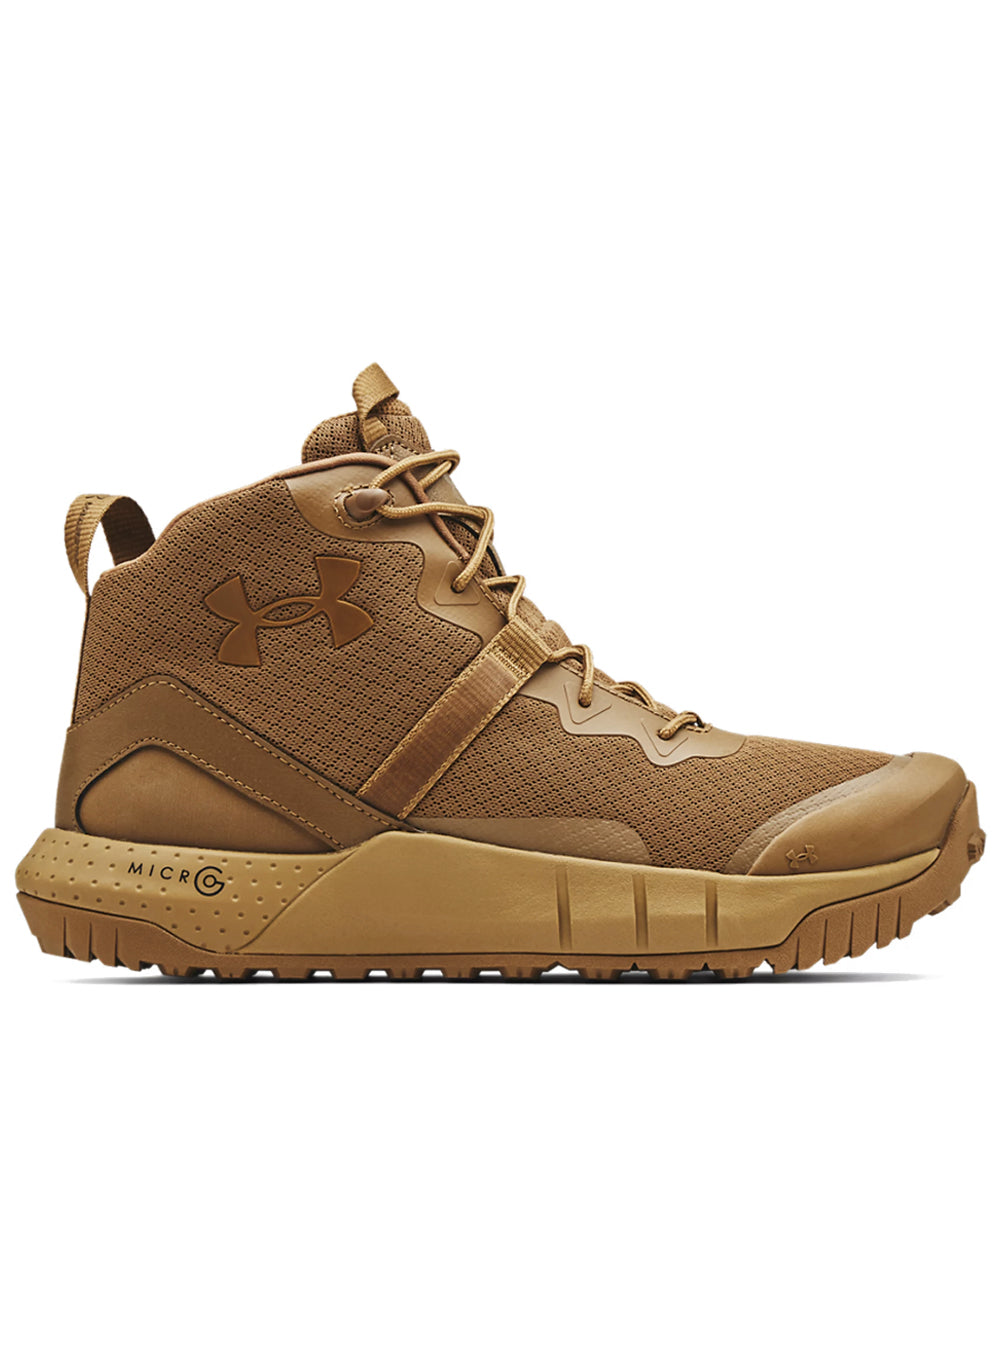 Under Armour Micro G Valsetz Mid - Coyote - TacSource